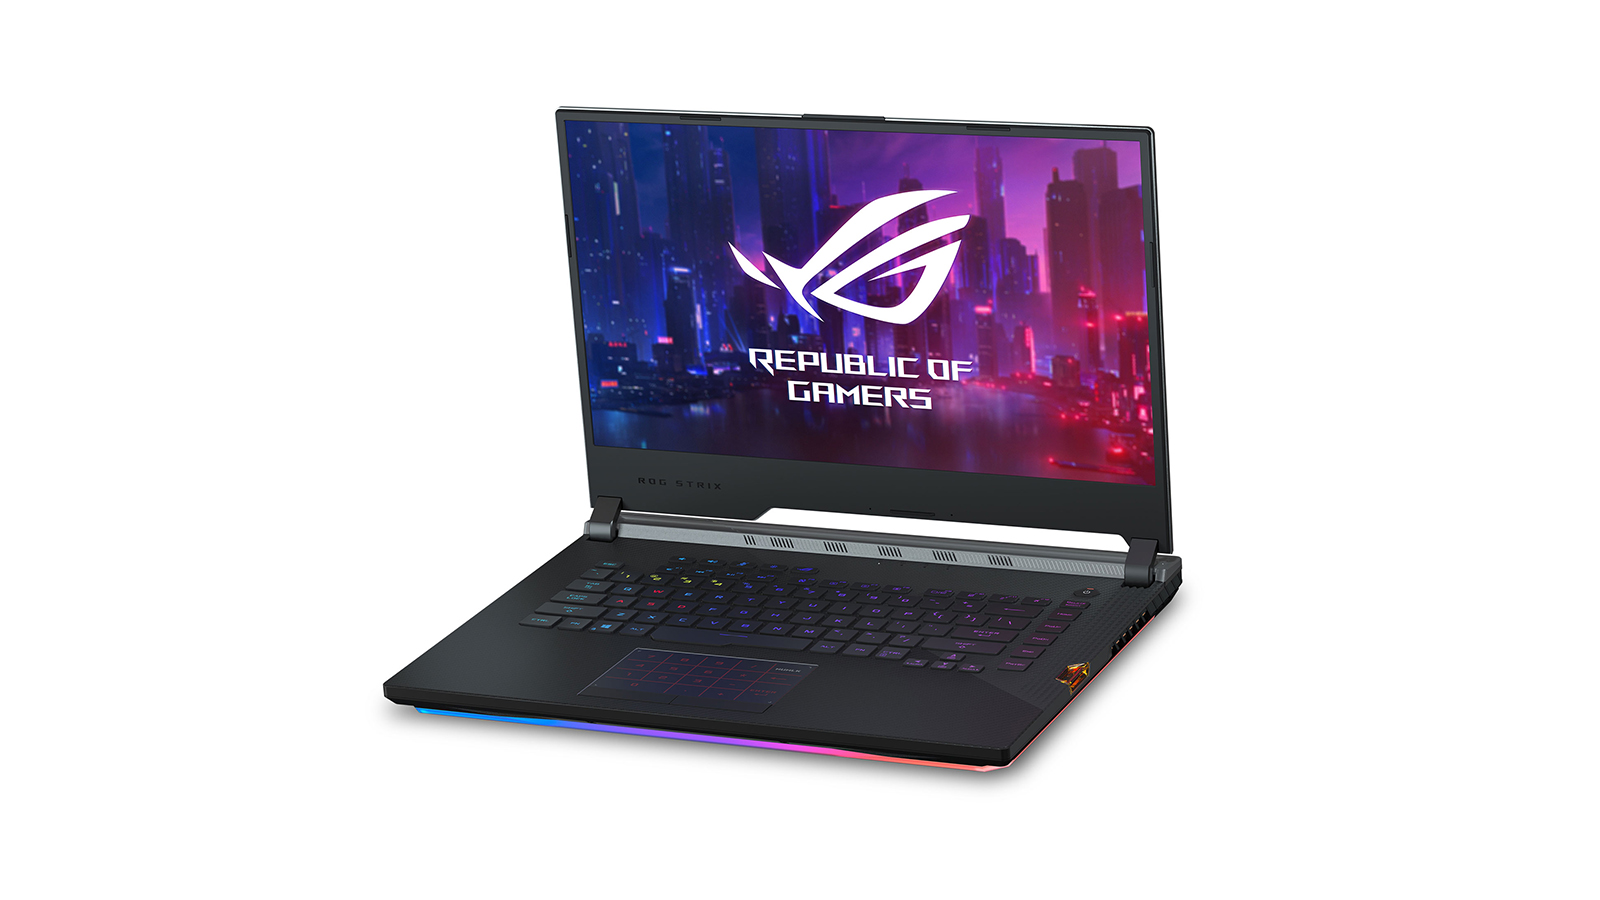 Best laptops for music production: ASUS ROG STRIX SCAR III